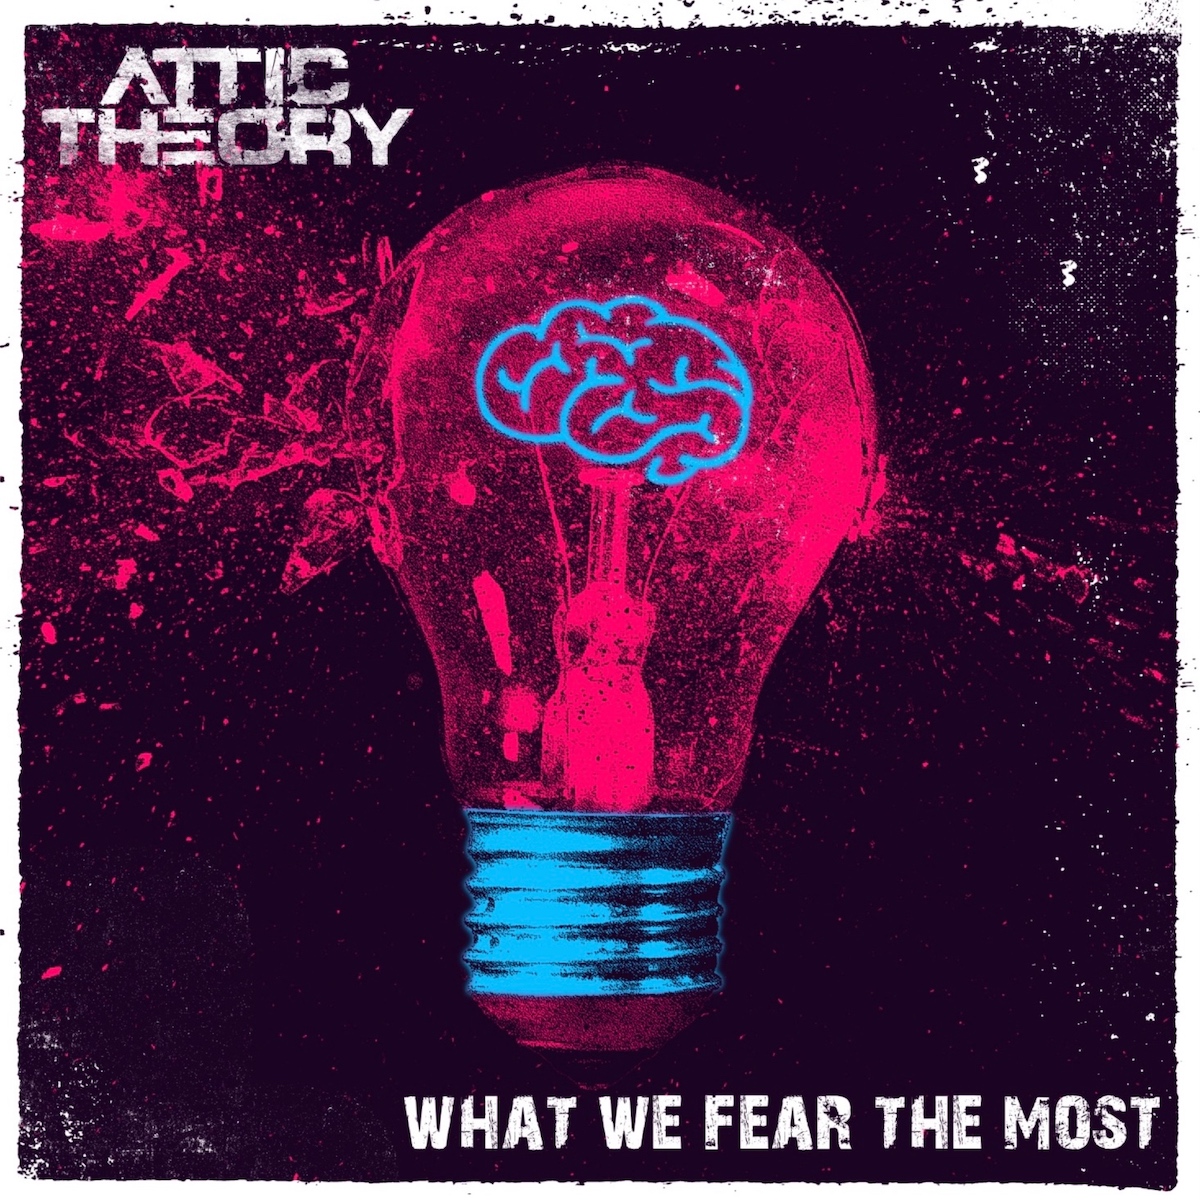 DEBUT ALBUM REVIEW: What We Fear the Most by Attic Theory